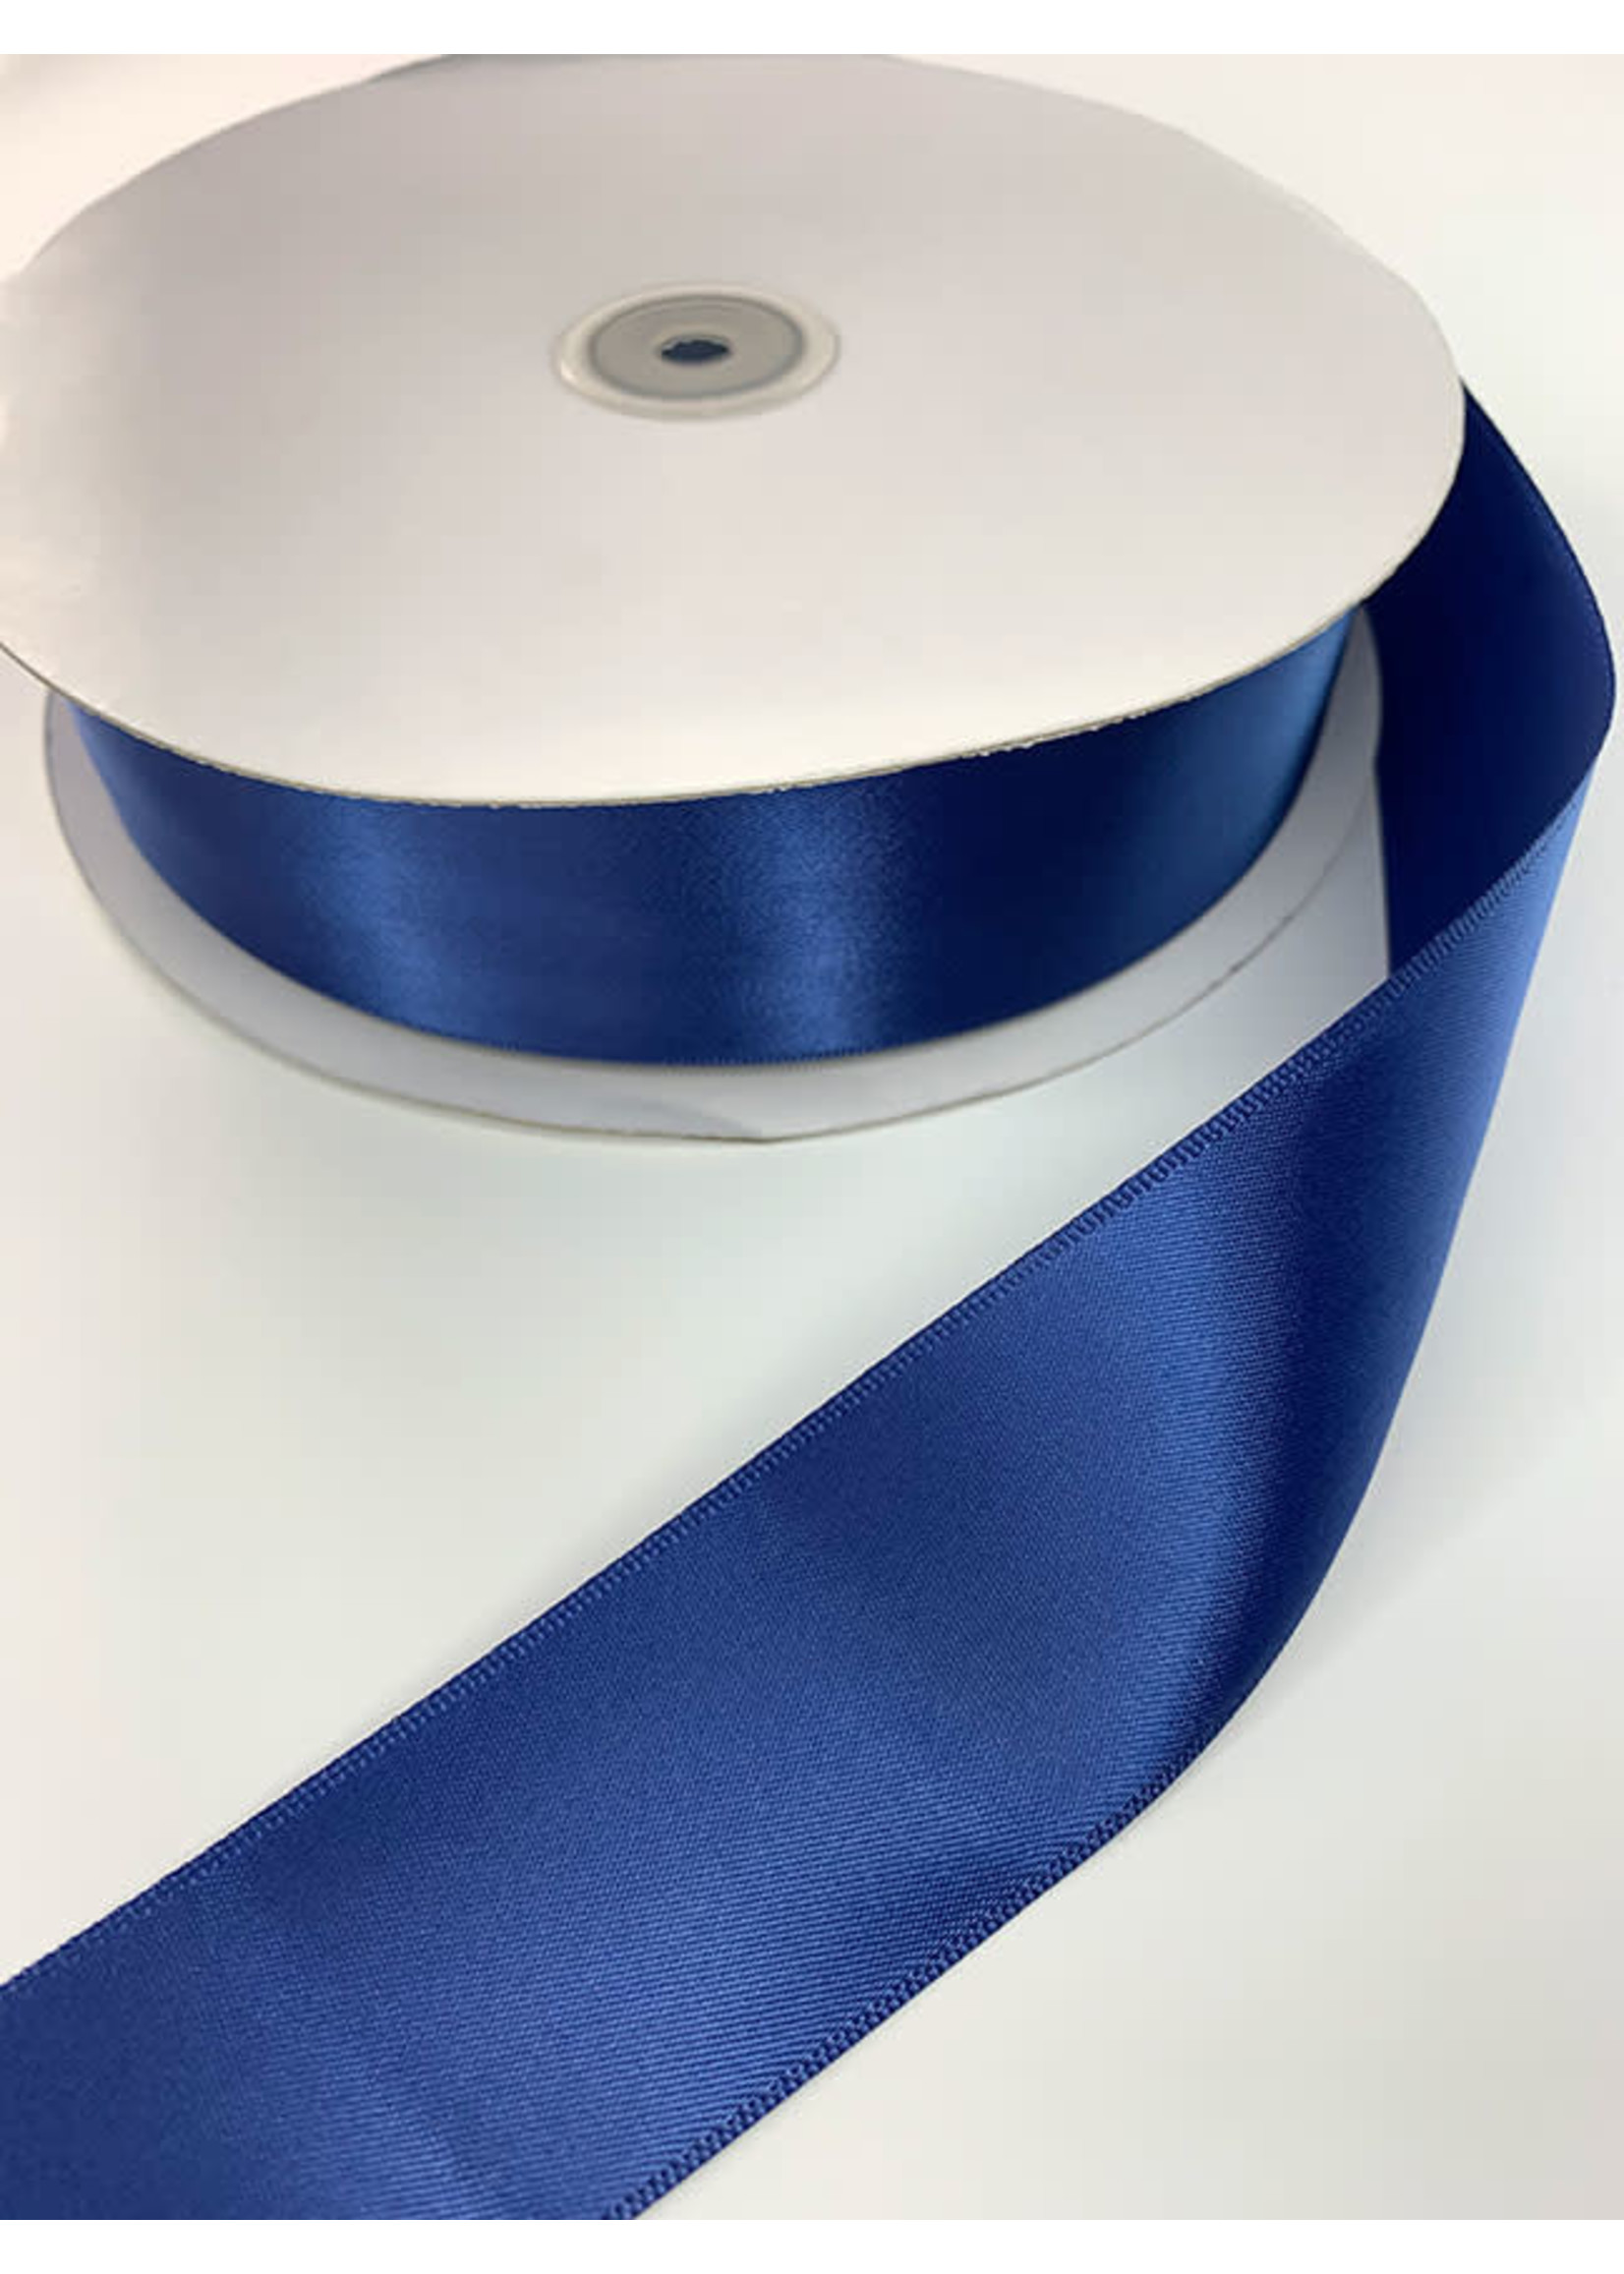 13mm Wide French Blue Satin Ribbon 10 METER ROLL of Narrow Double Faced  Satin Ribbon Dusky Blue Colour 1/2 Inch Wide 